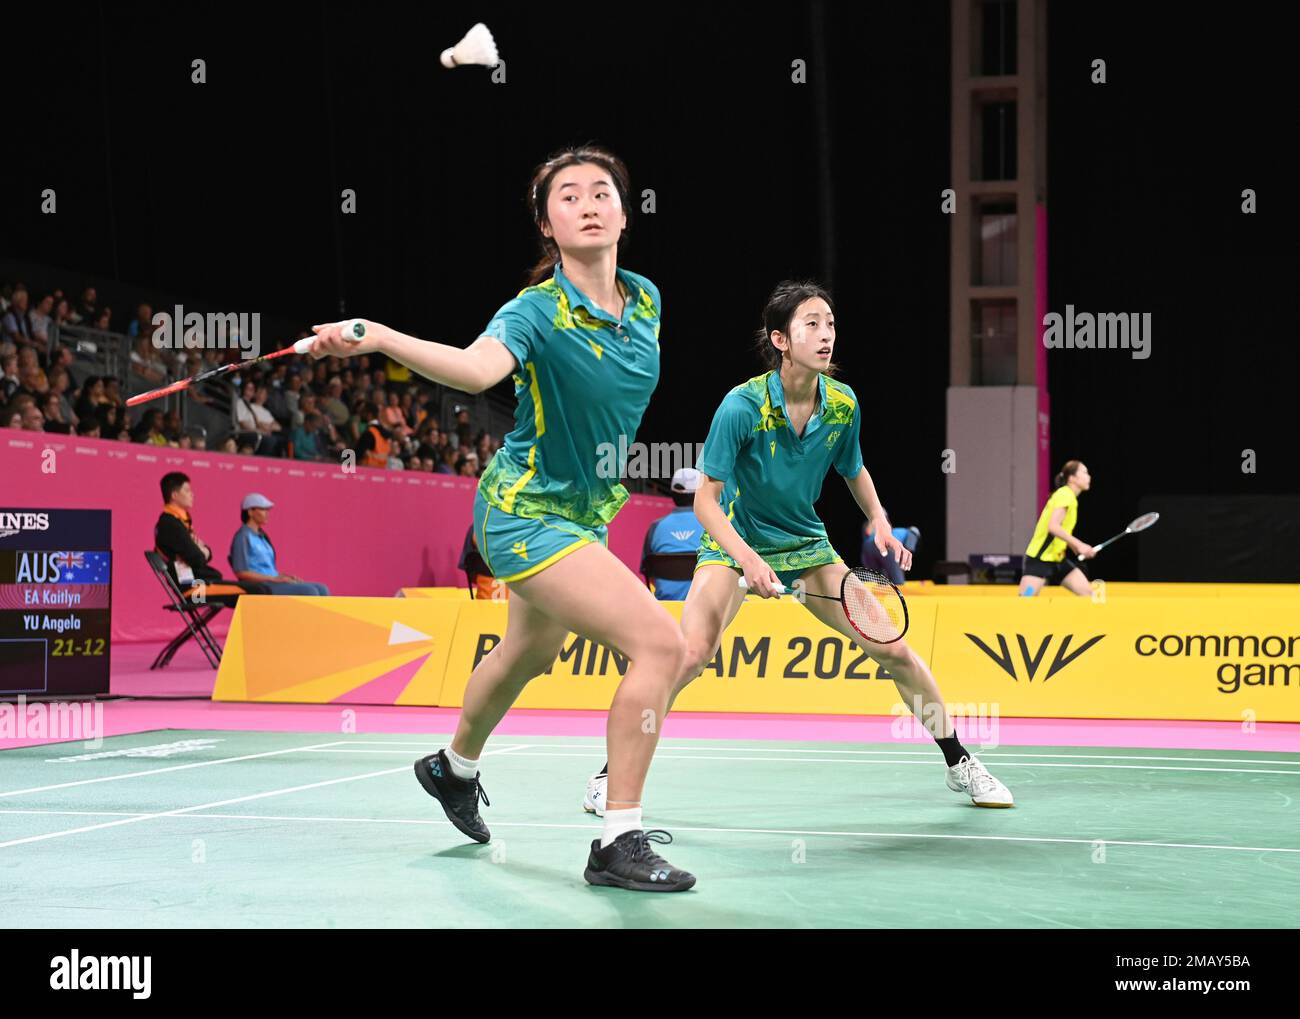 Australias Kaitlyn Ea, right, and Australias Angela Yug during the Badminton Womens Doubles Round game against Singapores Yujia Jin and and Singapores Jia Ying Crystal Wong at the Commonwealth Games in Birmingham,